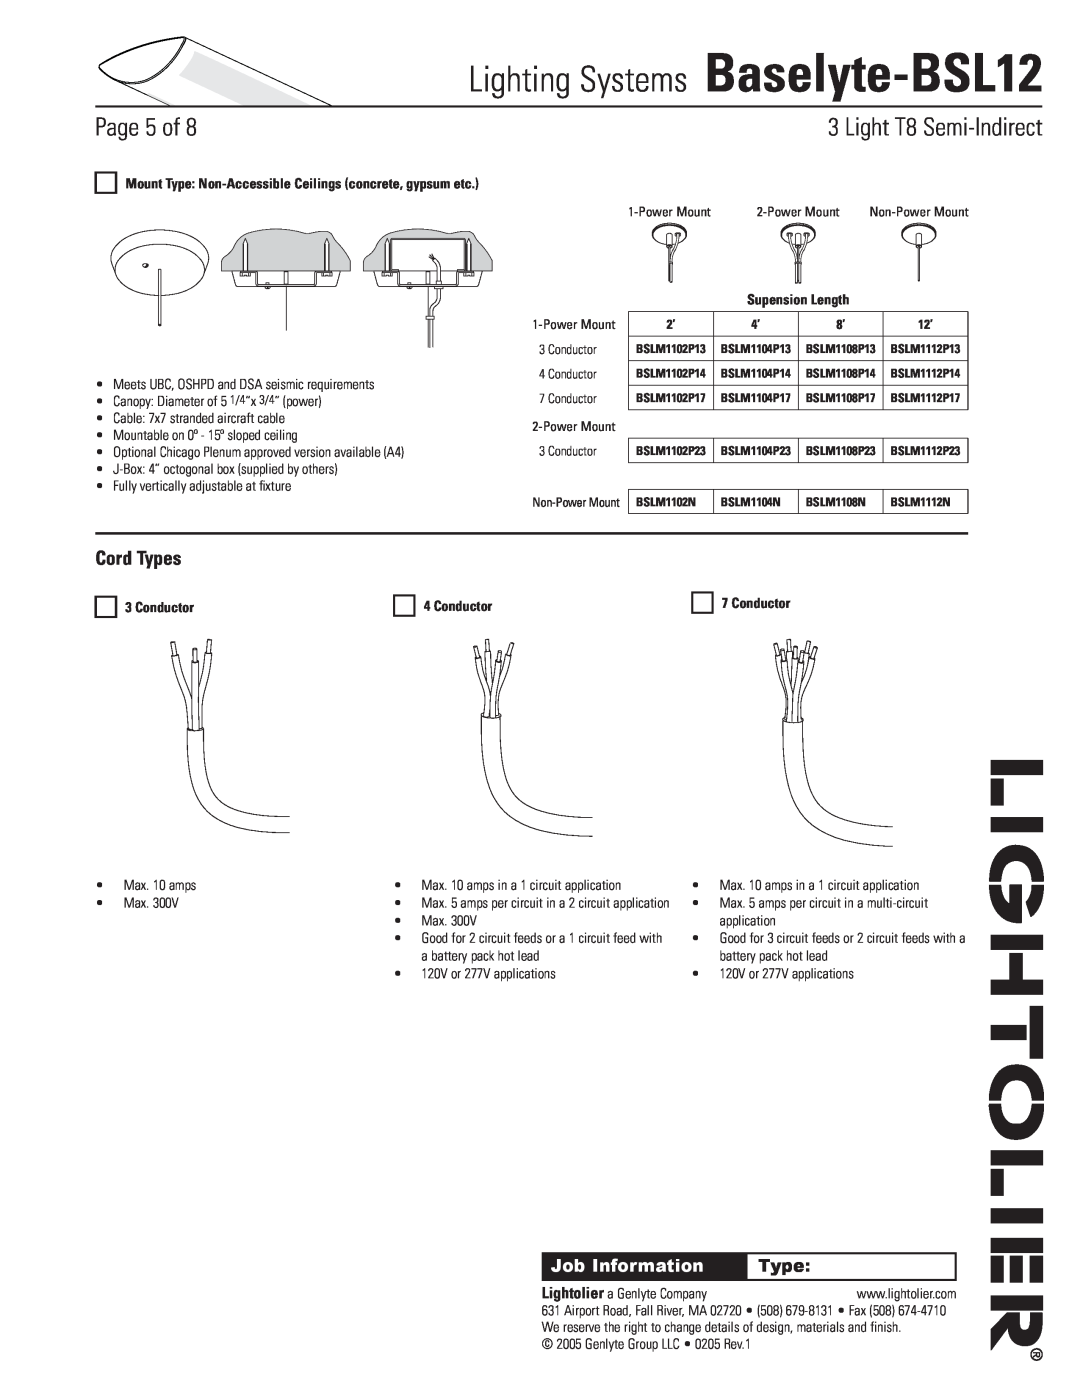 Lightolier Cord Types, Conductor, Lighting Systems Baselyte-BSL12, Page of, Light T8 Semi-Indirect, Job Information 